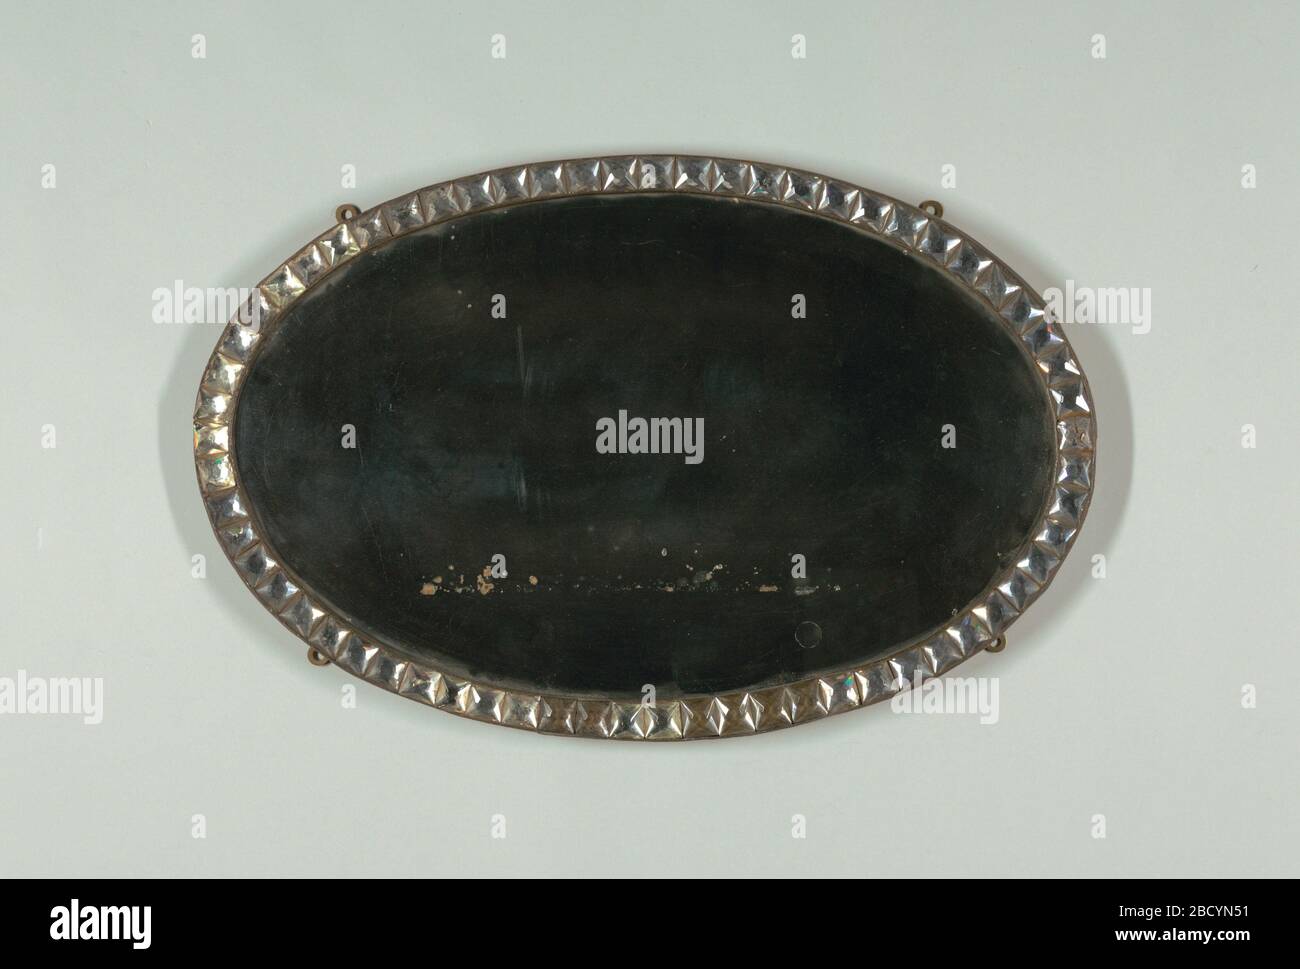 Mirror. Research in ProgressOval mirror surrounded by oval metal frame with row of square, faceted glass 'jewels'; wood backing; four mounting rings on reverse, allowing vertical or horizontal orientation. Mirror Stock Photo